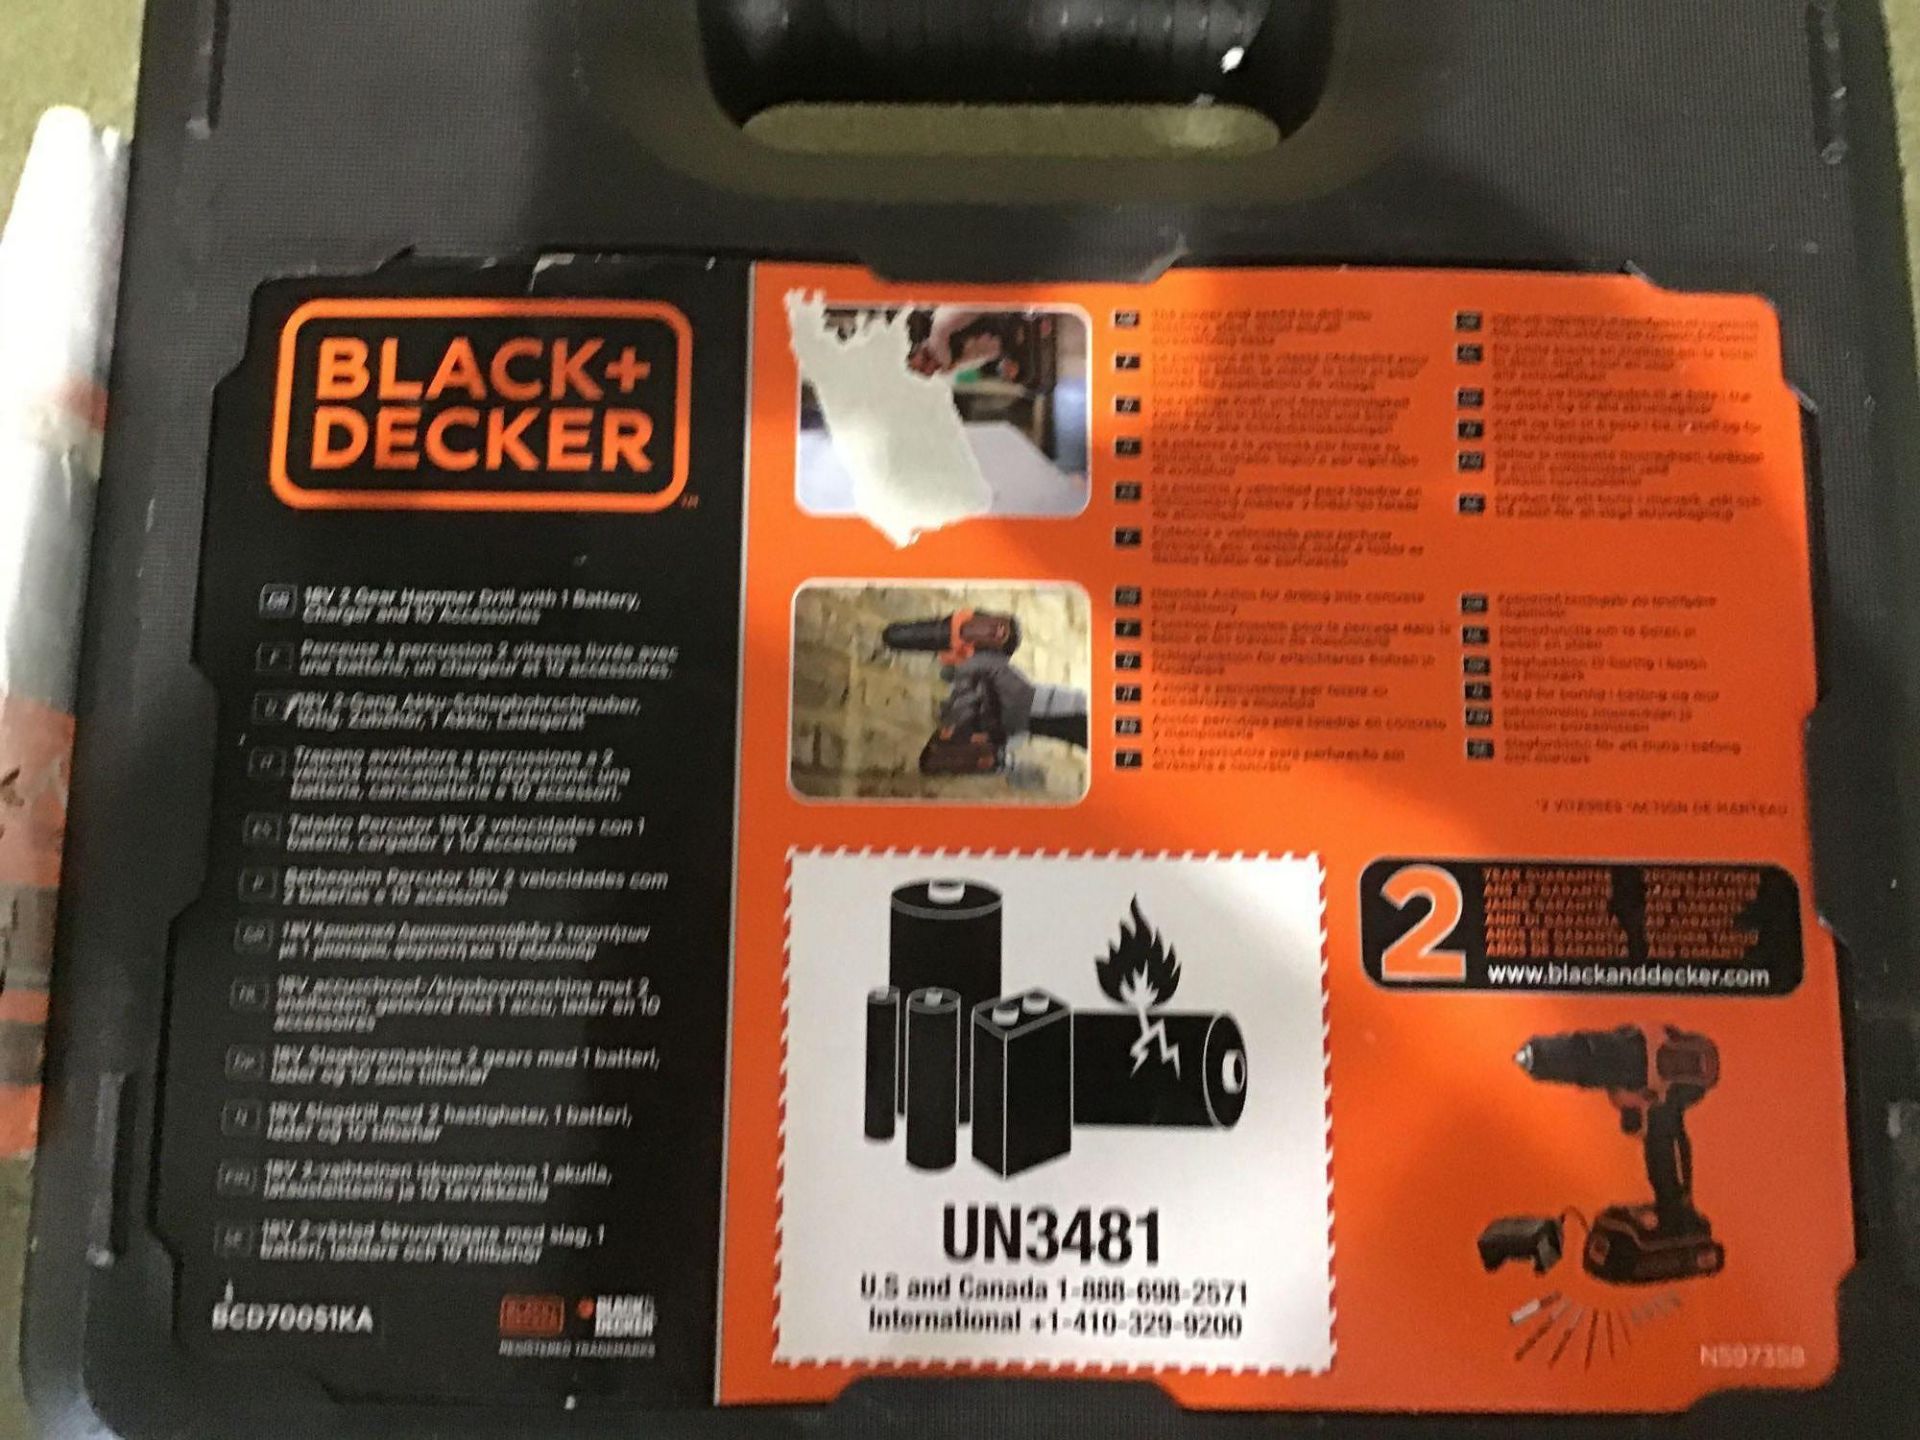 Black + Decker Cordless Hammer Drill with Battery - 18V - £50.00 RRP - Image 2 of 3